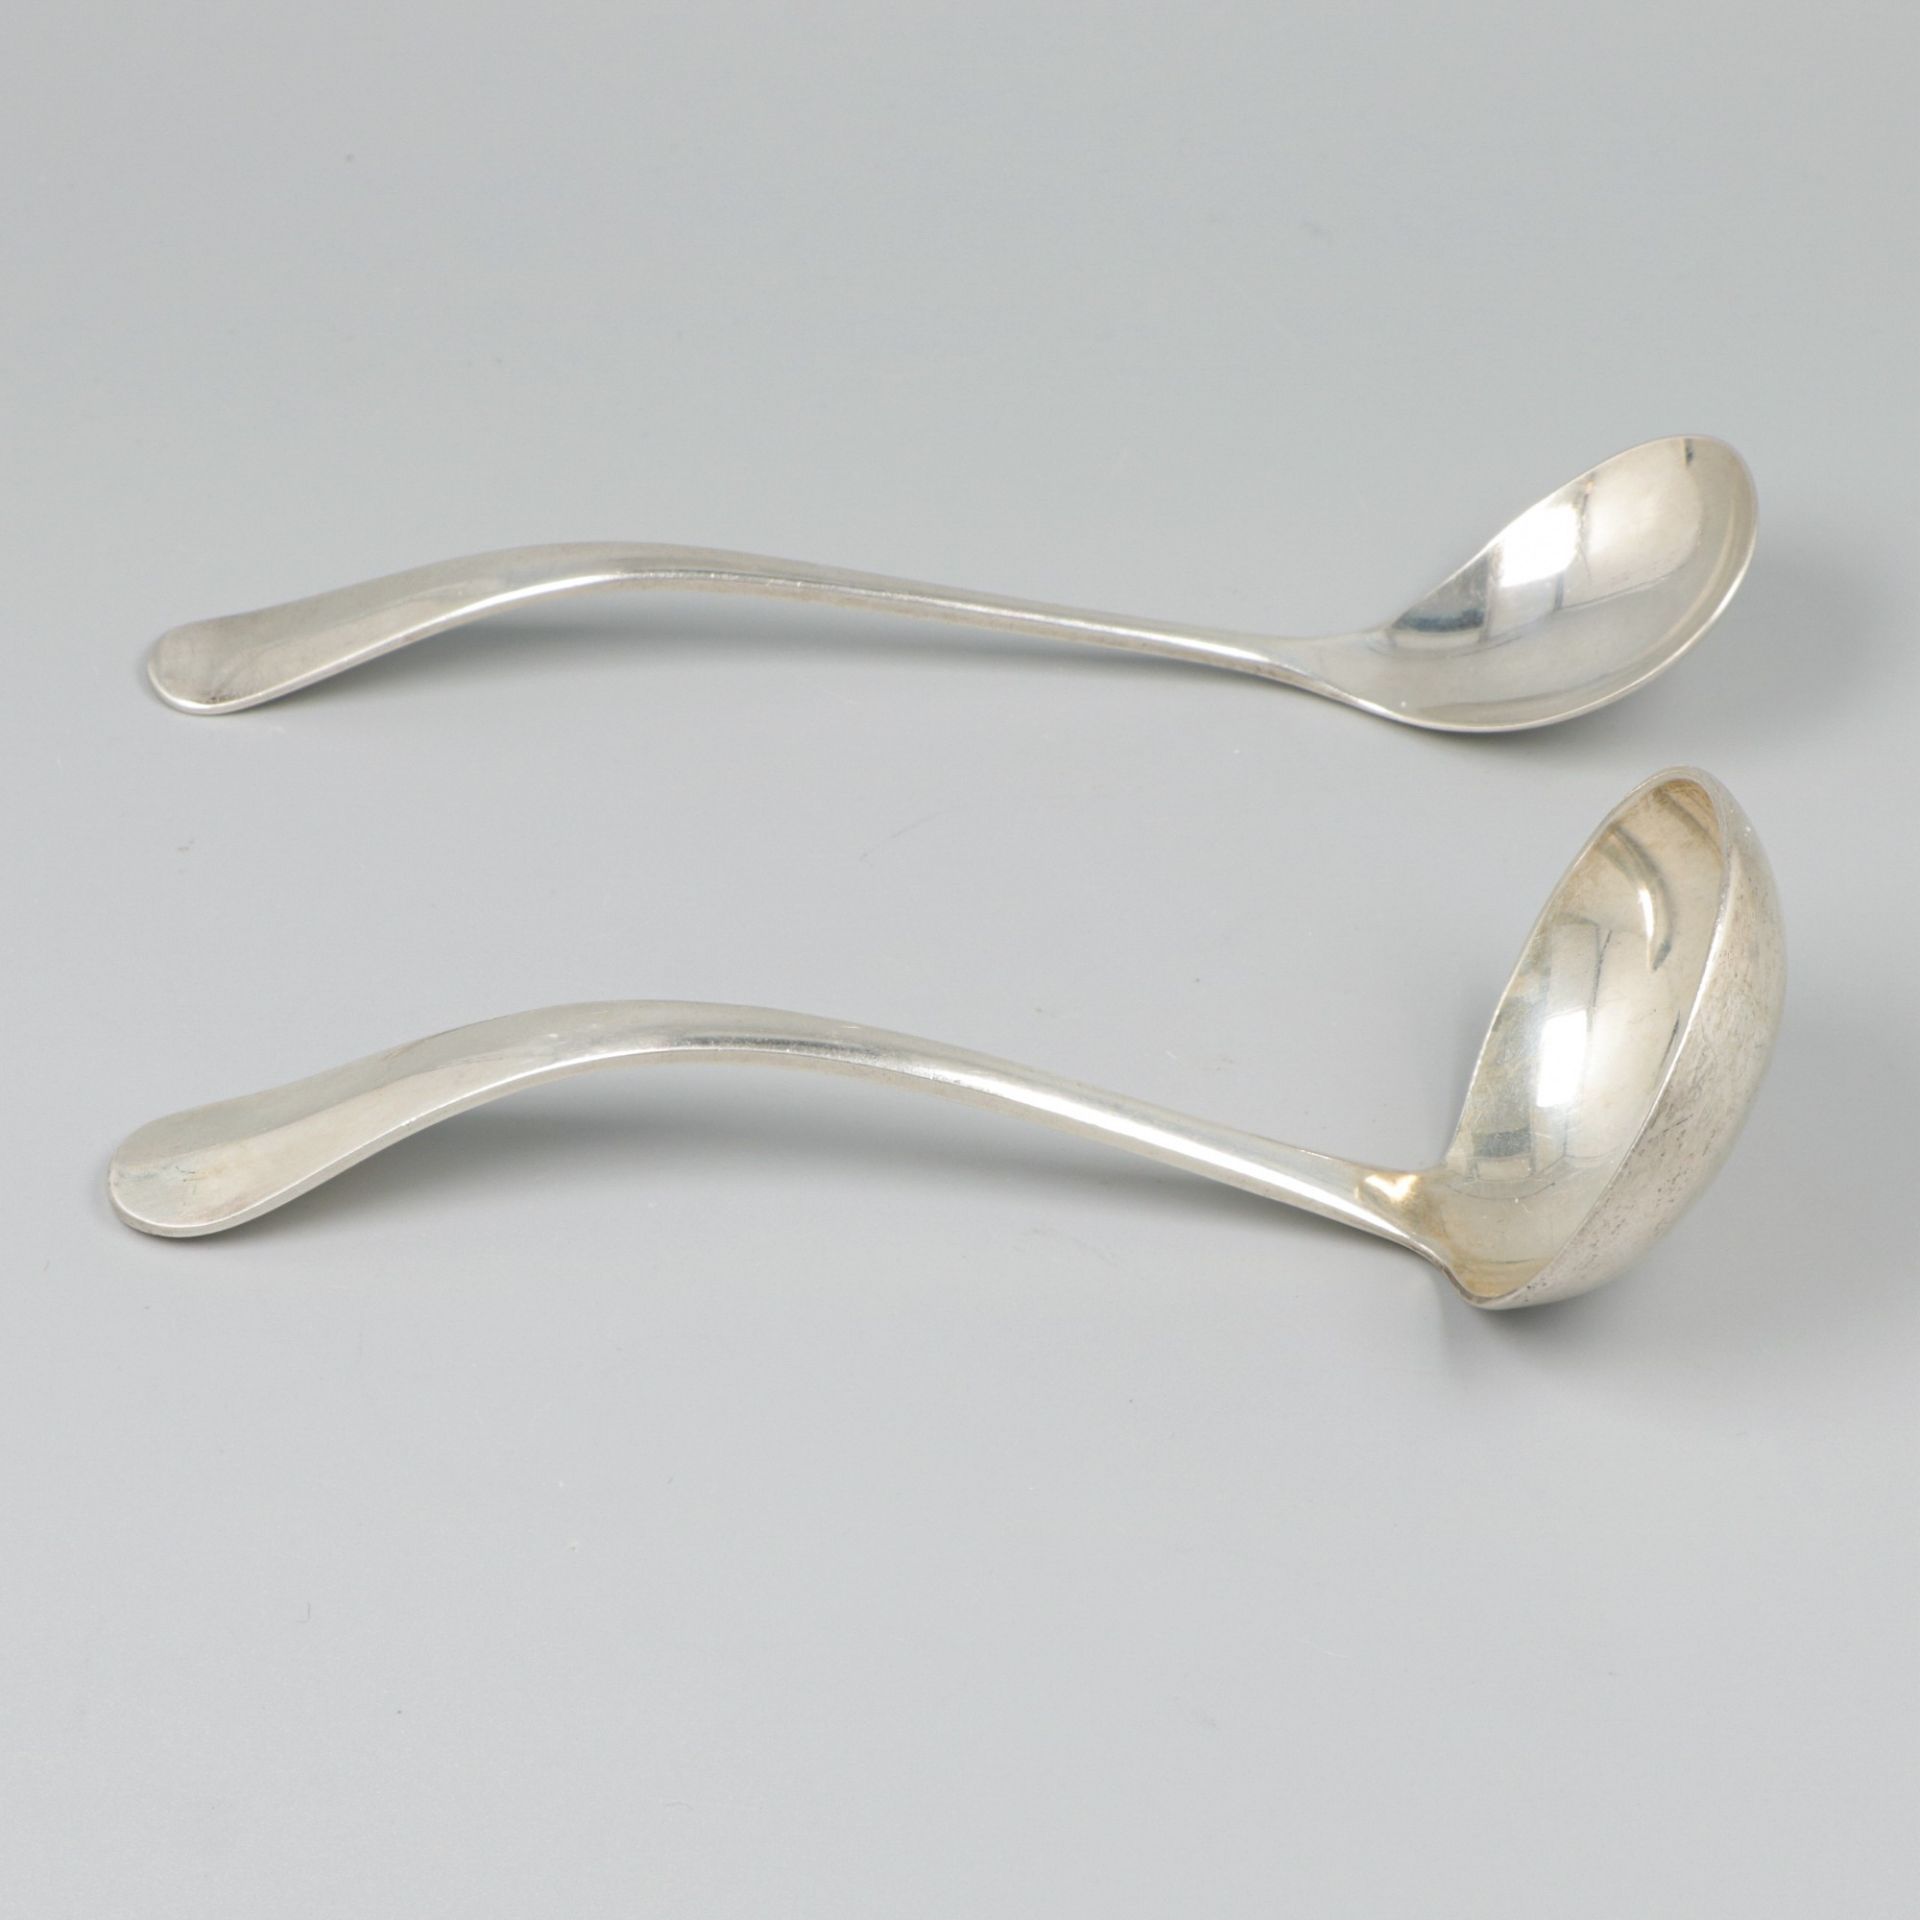 Sauce spoon and jam spoon silver. - Image 3 of 8